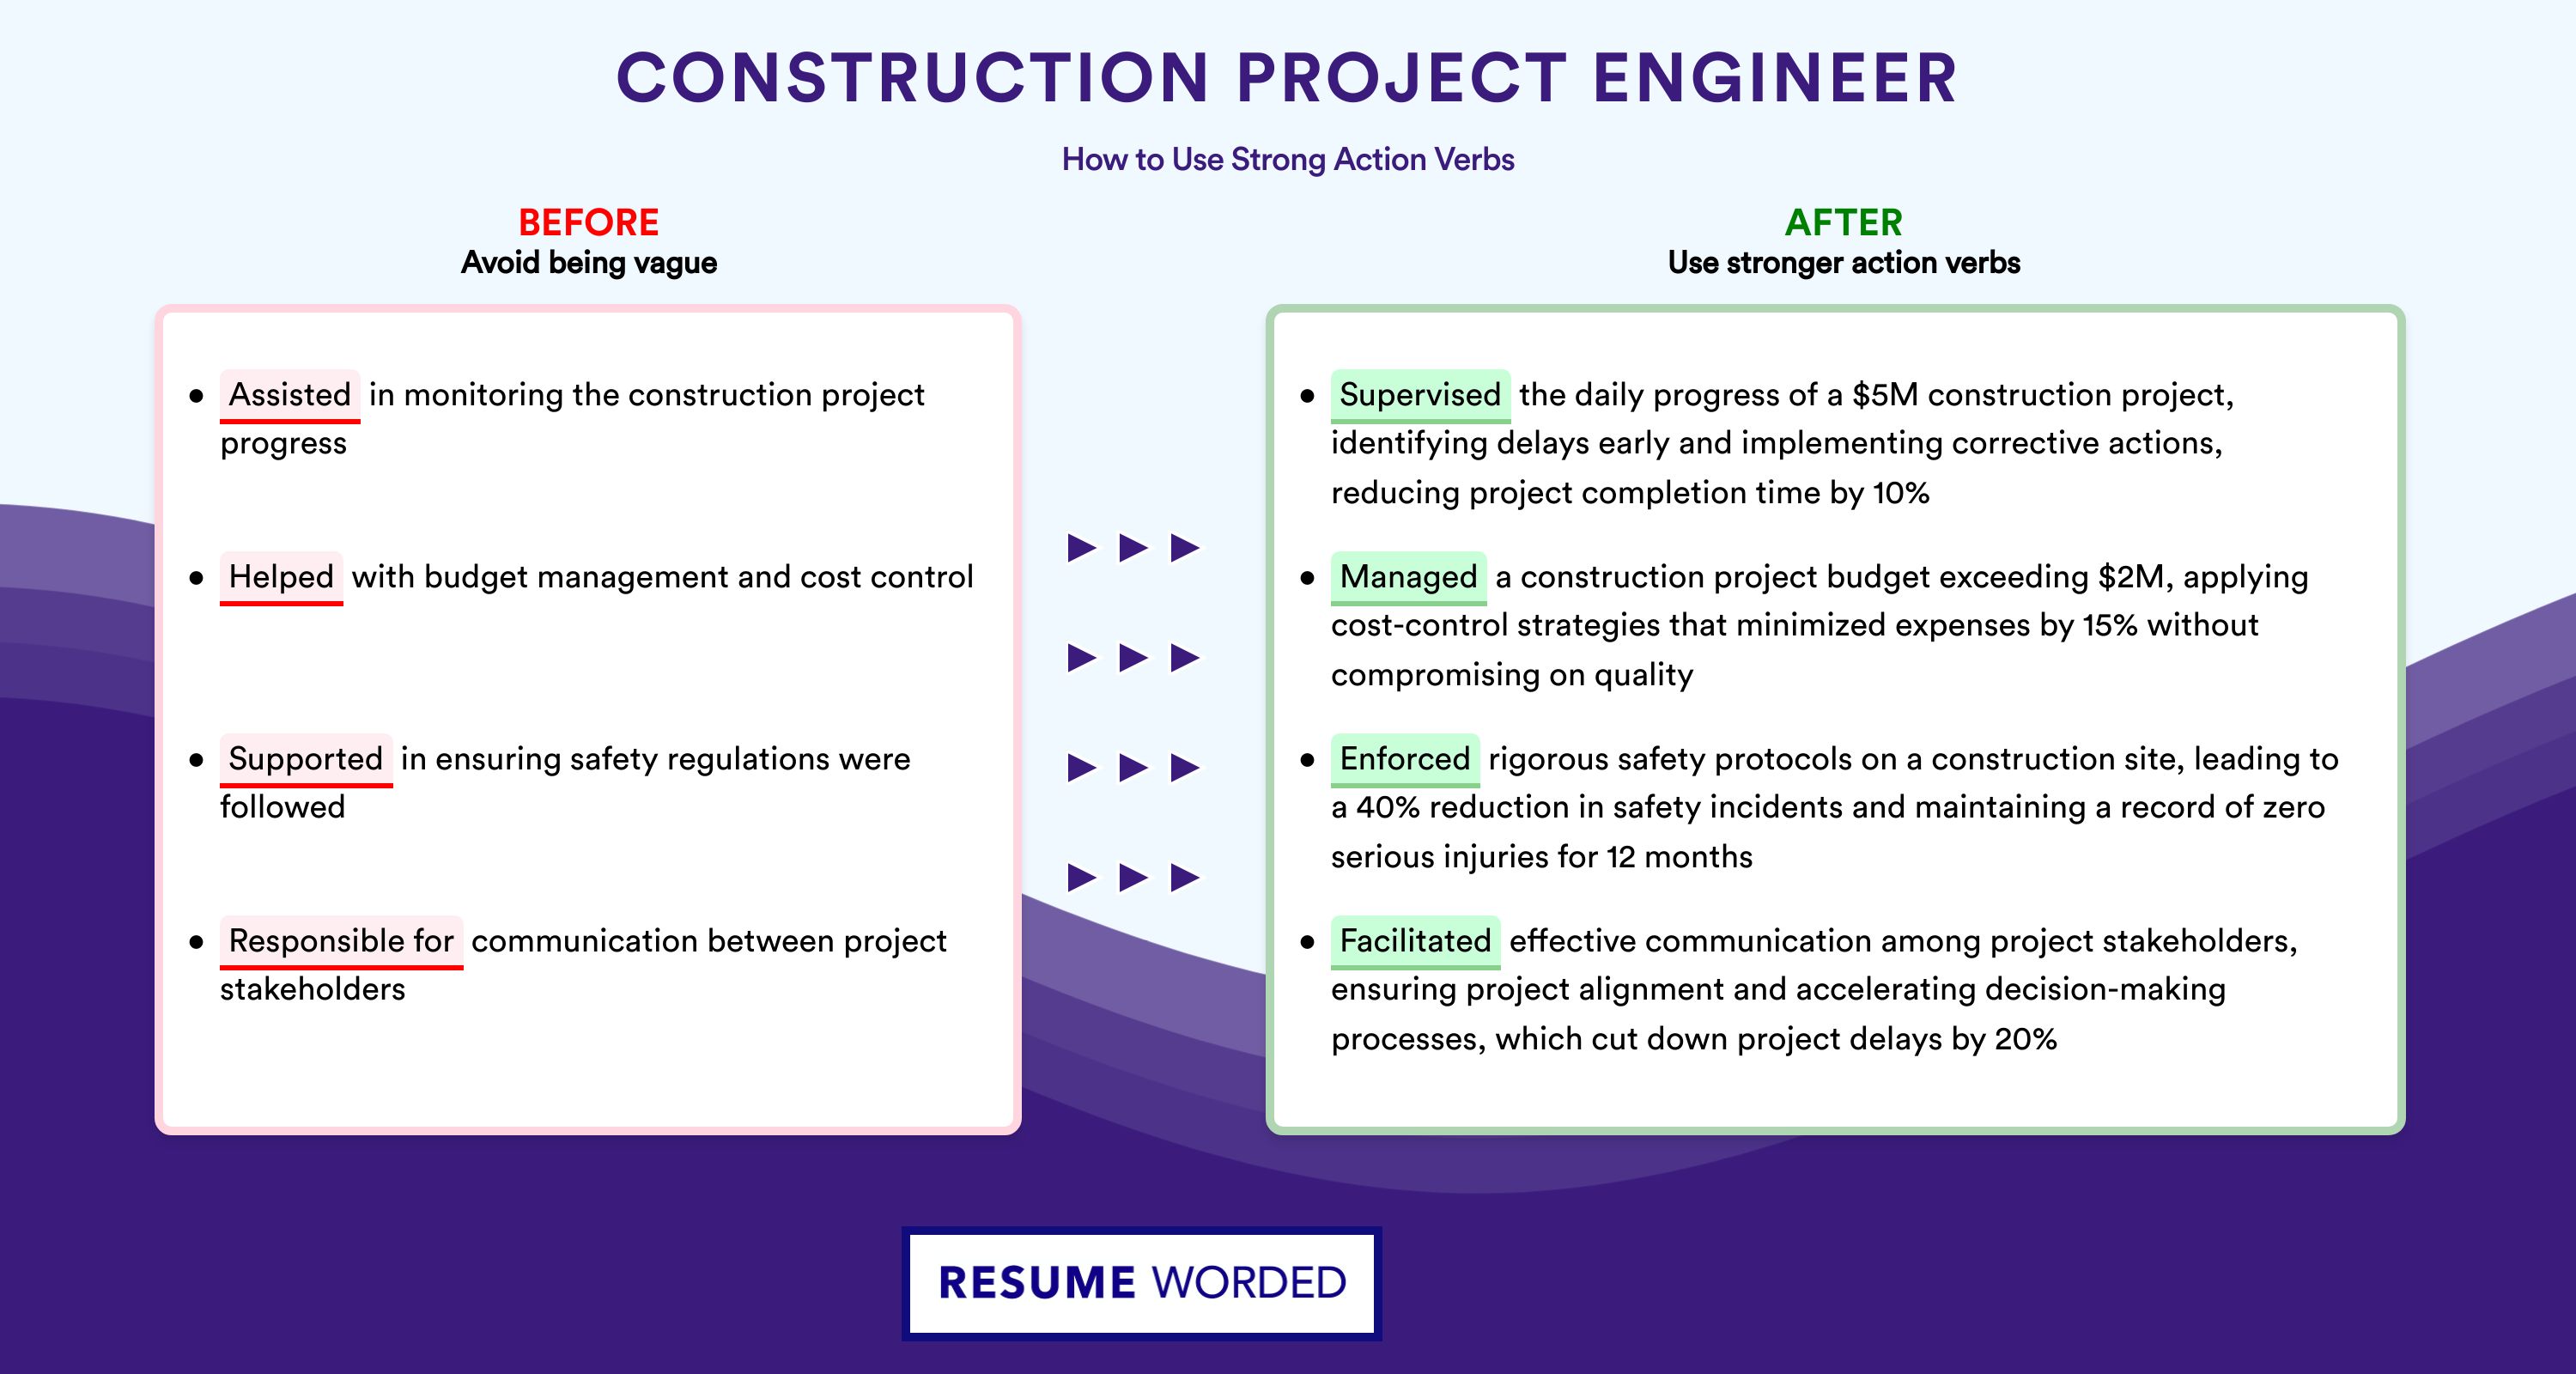 Action Verbs for Construction Project Engineer